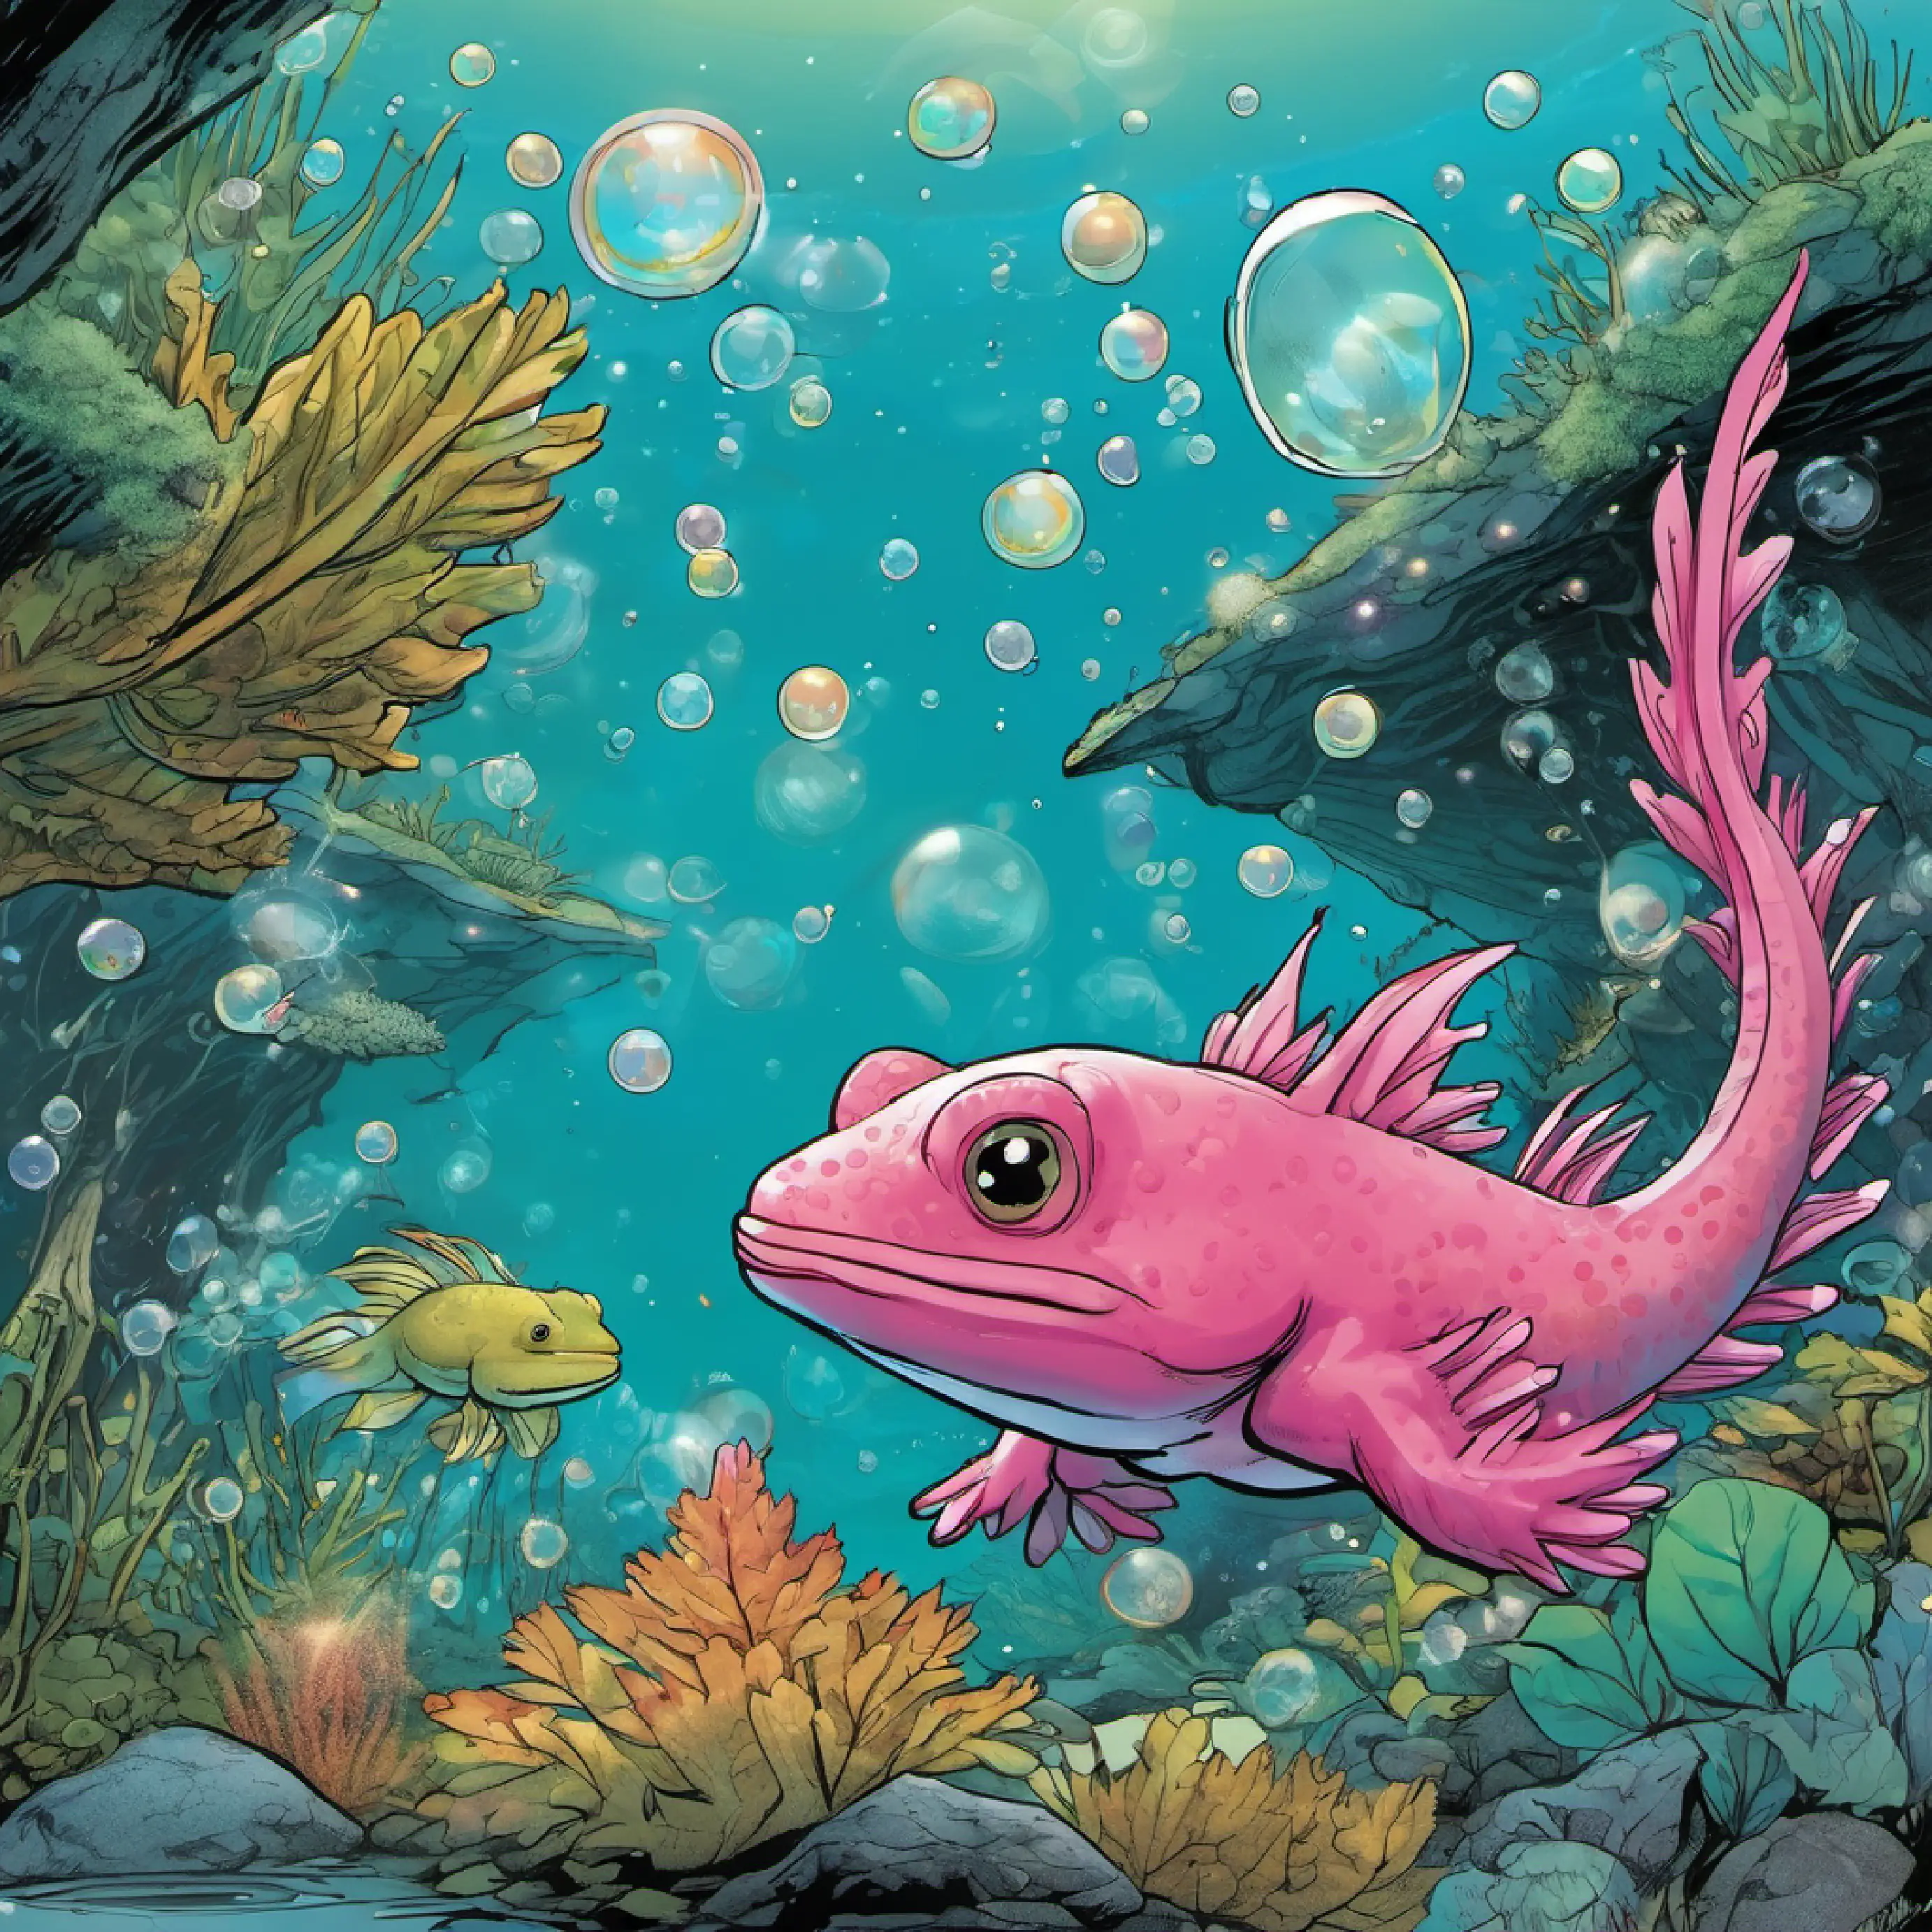 They find the Great Current and discover a bubble holding axolotl secrets.